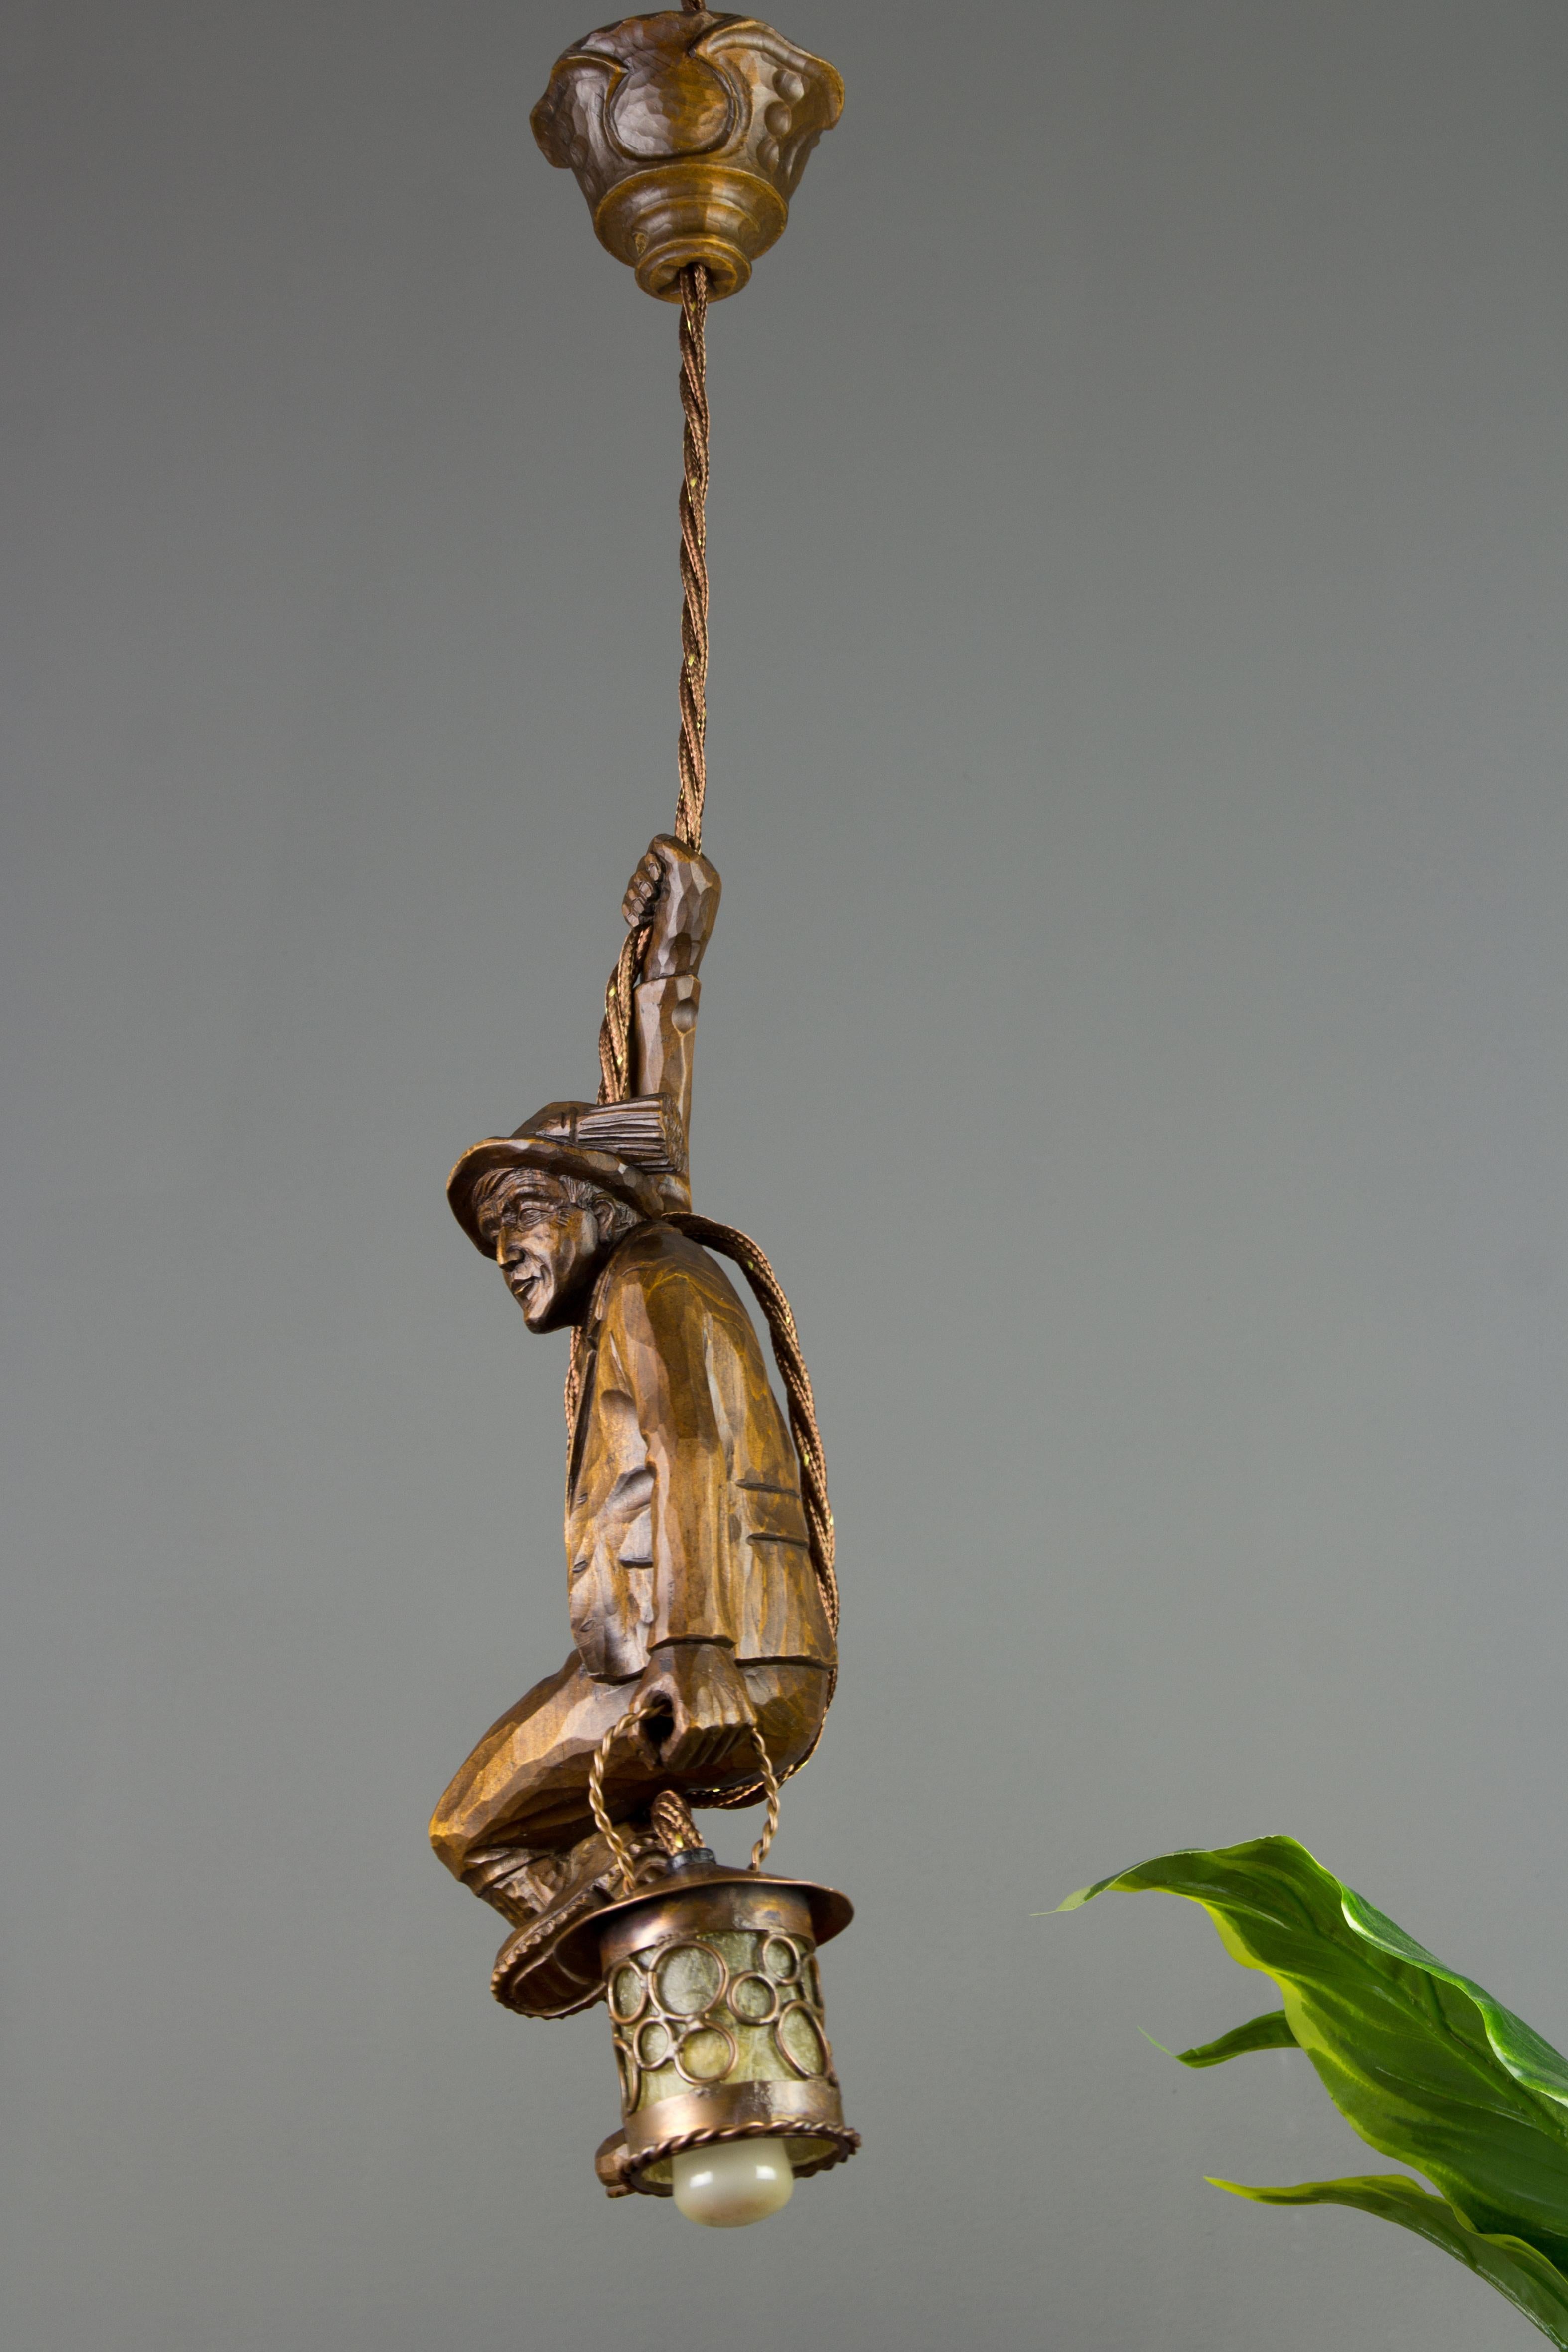 German Pendant Light Hand Carved Wood Figure Mountain Climber with Lantern For Sale 1